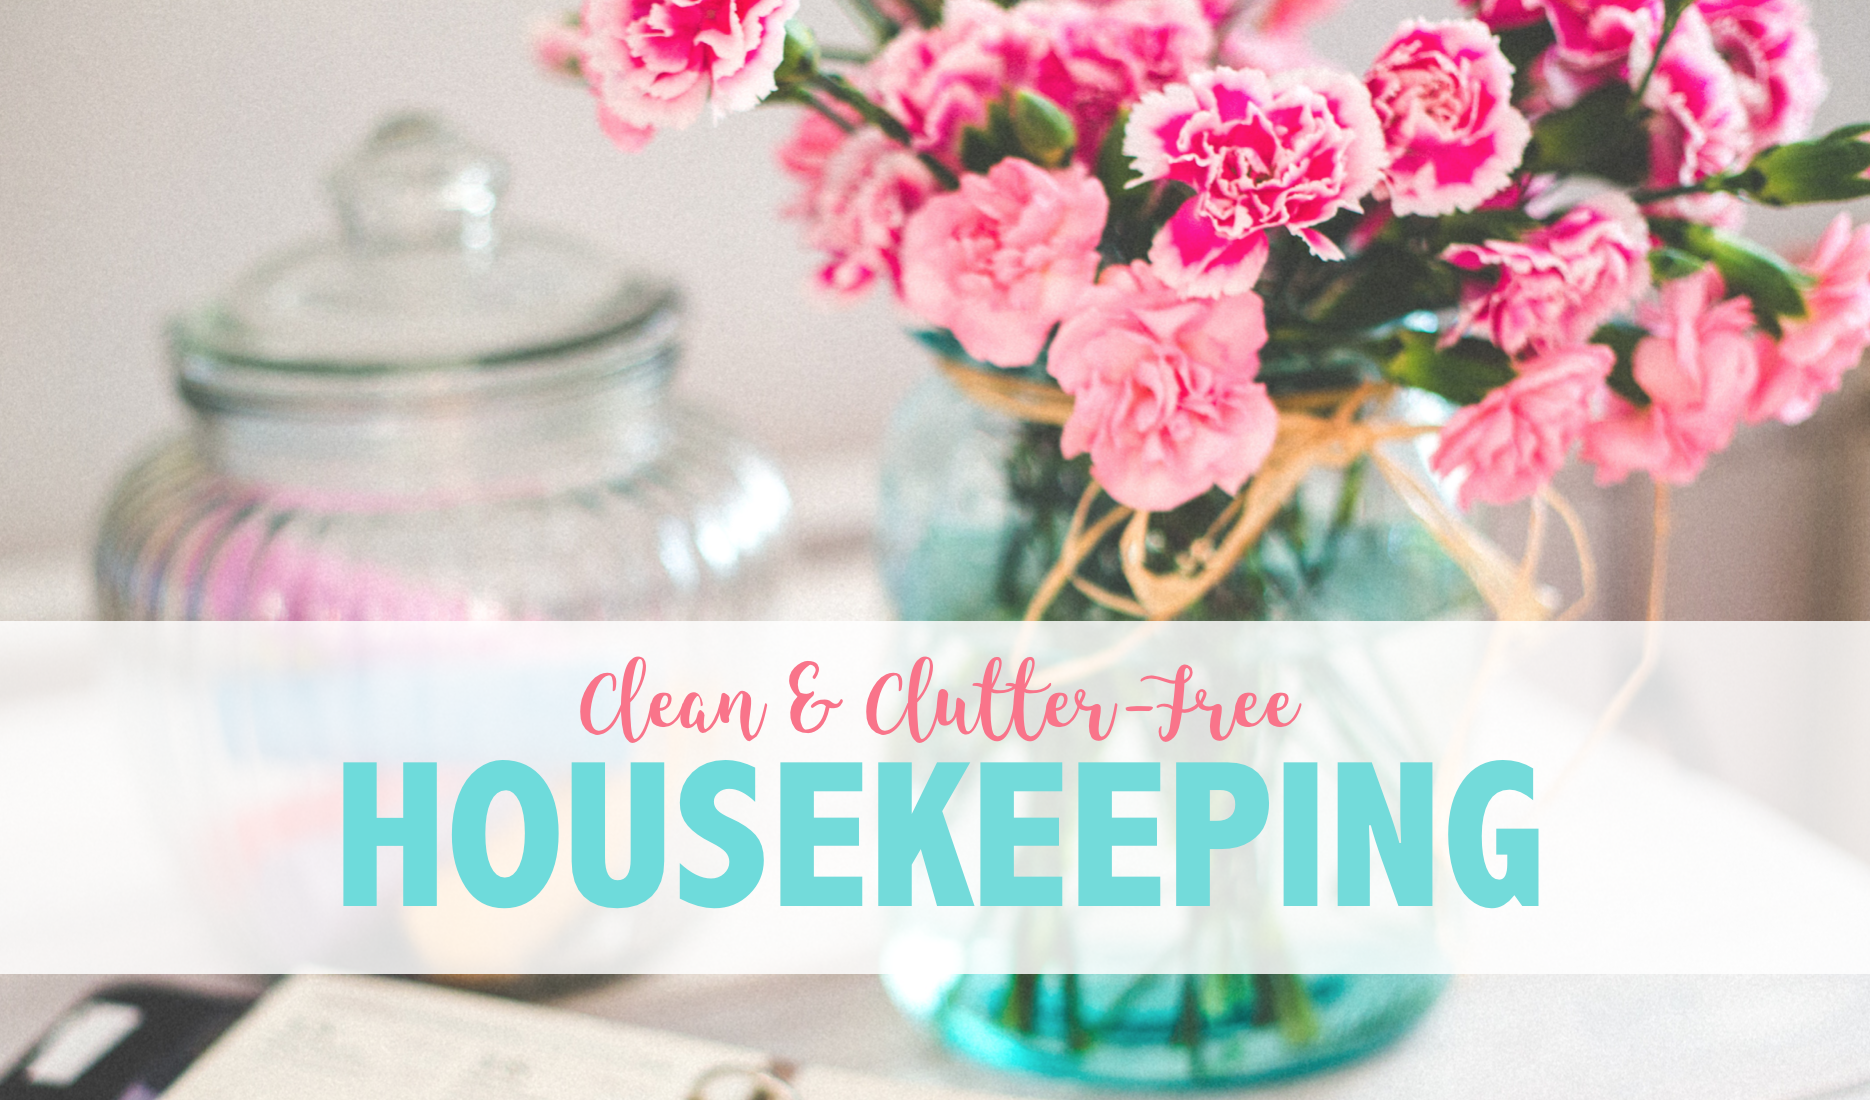 How to keep your home clean and clutter free